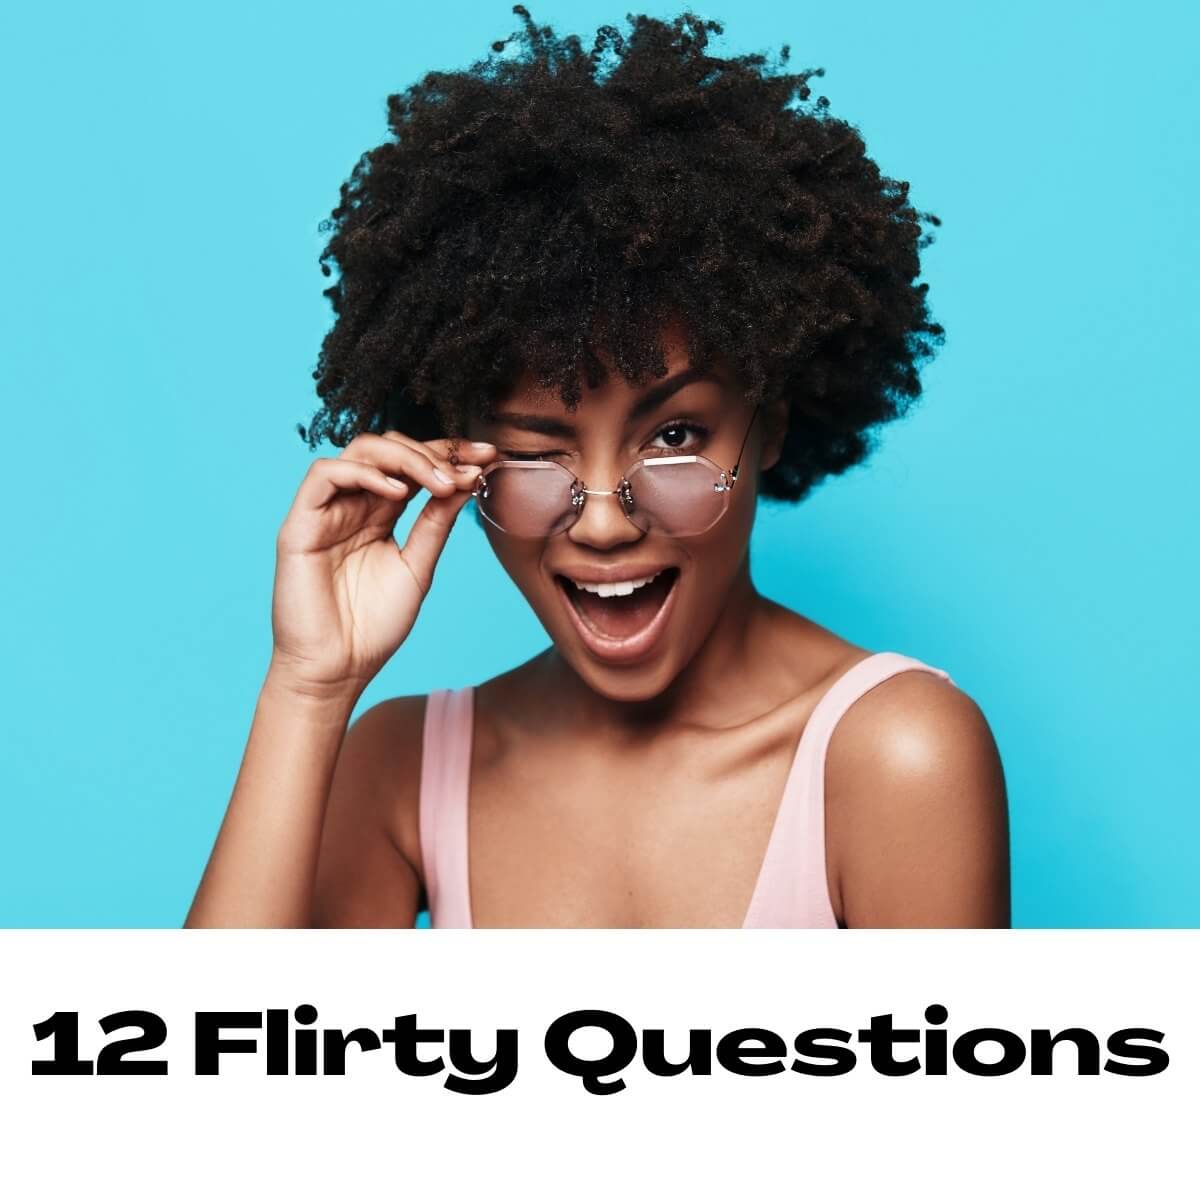 123-questions-to-play-freaky-numbers-game-for-snapchat-the-narcissistic-life